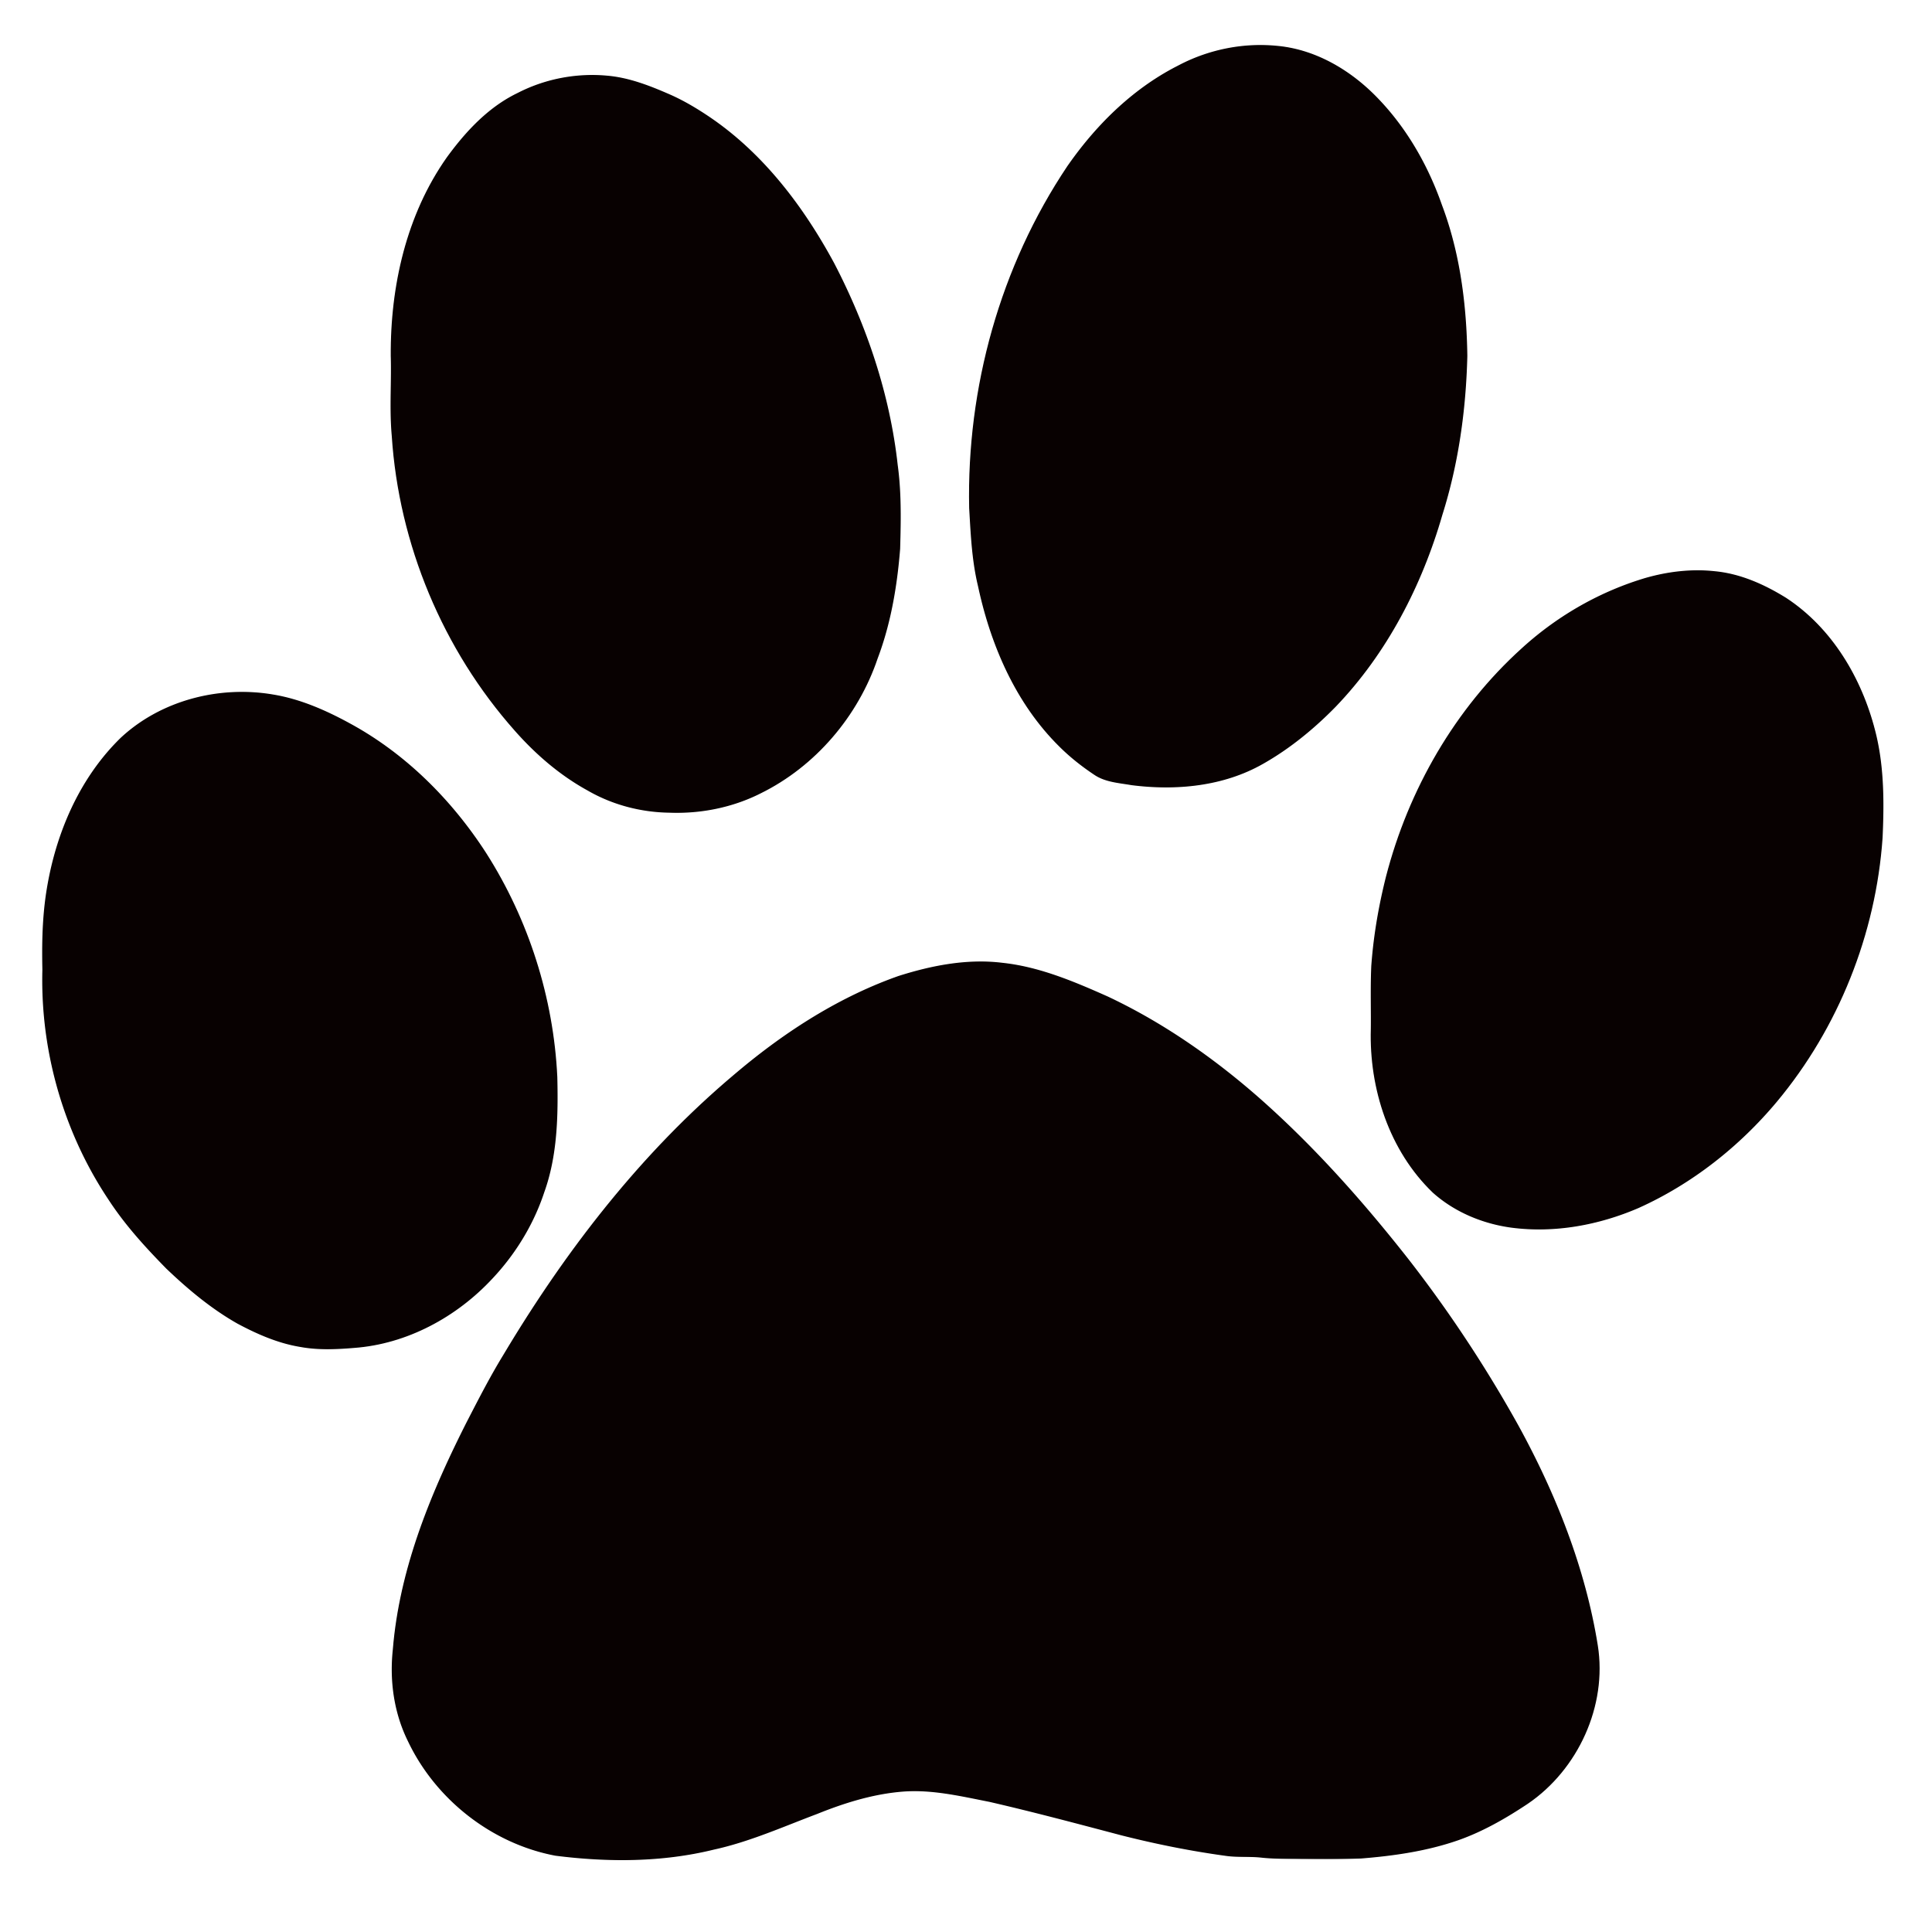 cougar paw print graphic